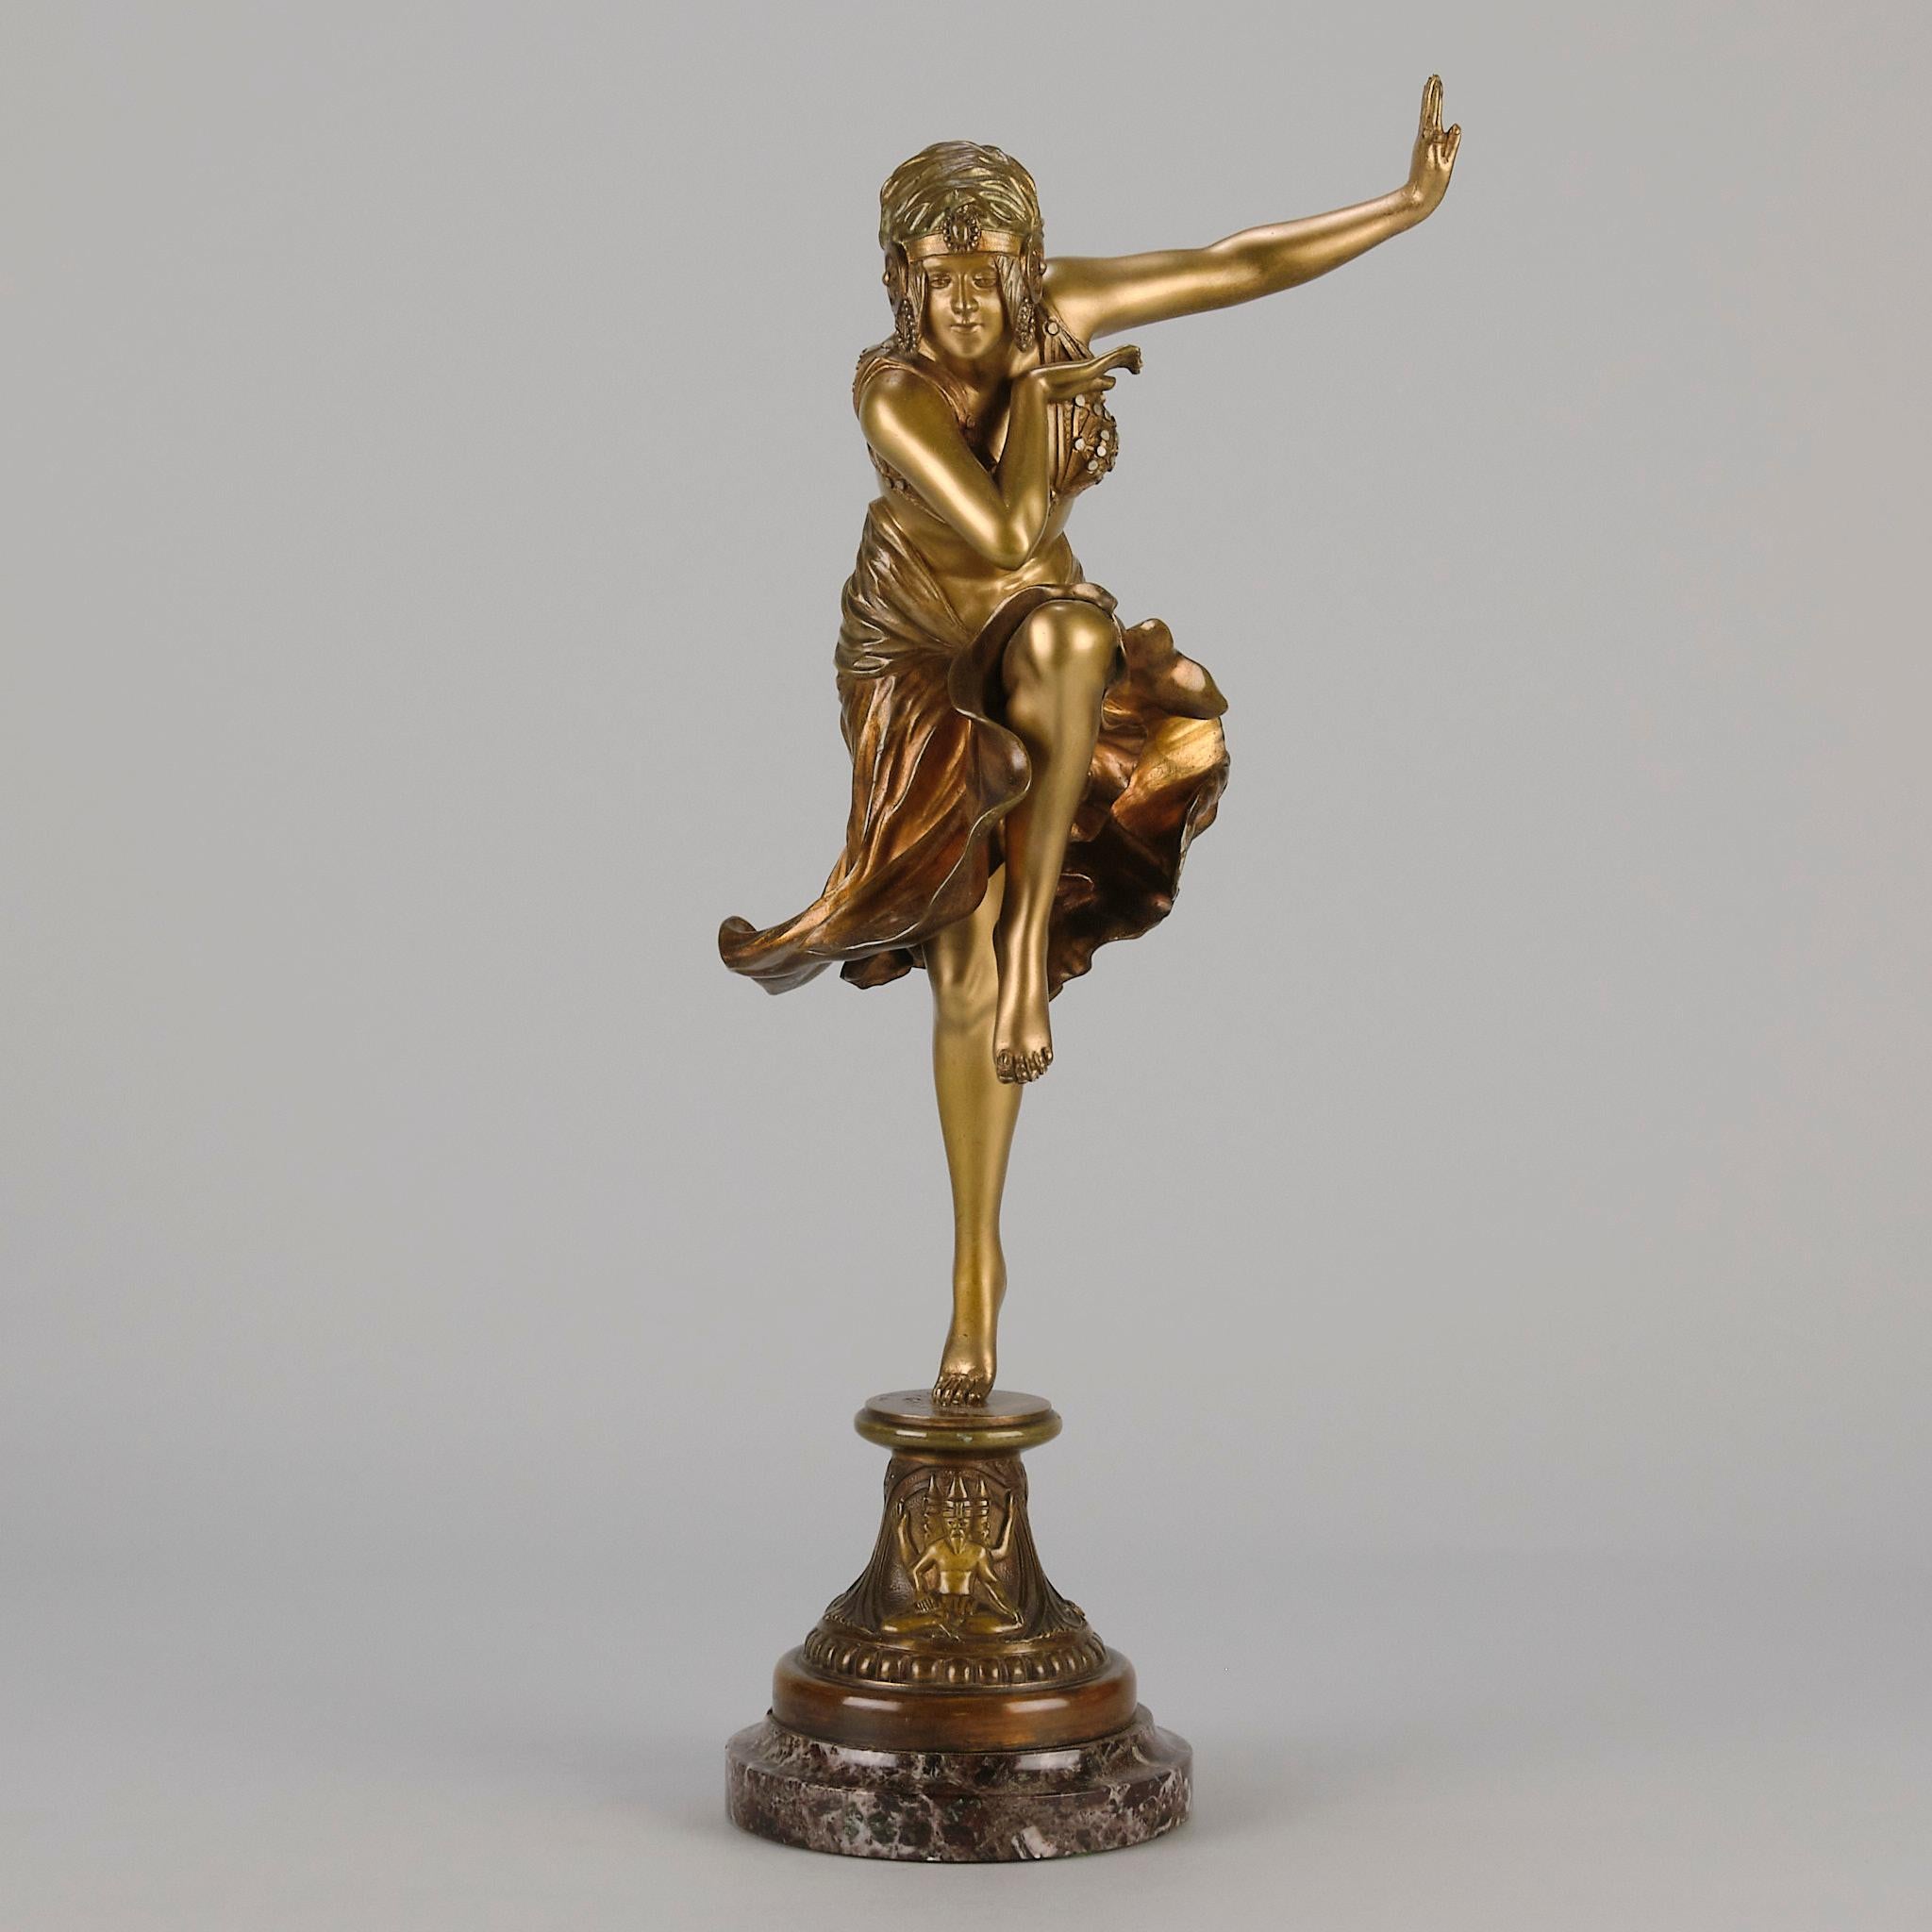 A dramatic early 20th Century French Art Deco gilt and enamel bronze figure of a beautiful elegant dancer in stylised pose wearing an attractive costume and headdress with superb intricate surface detail and colour, raised on an intergral shaped